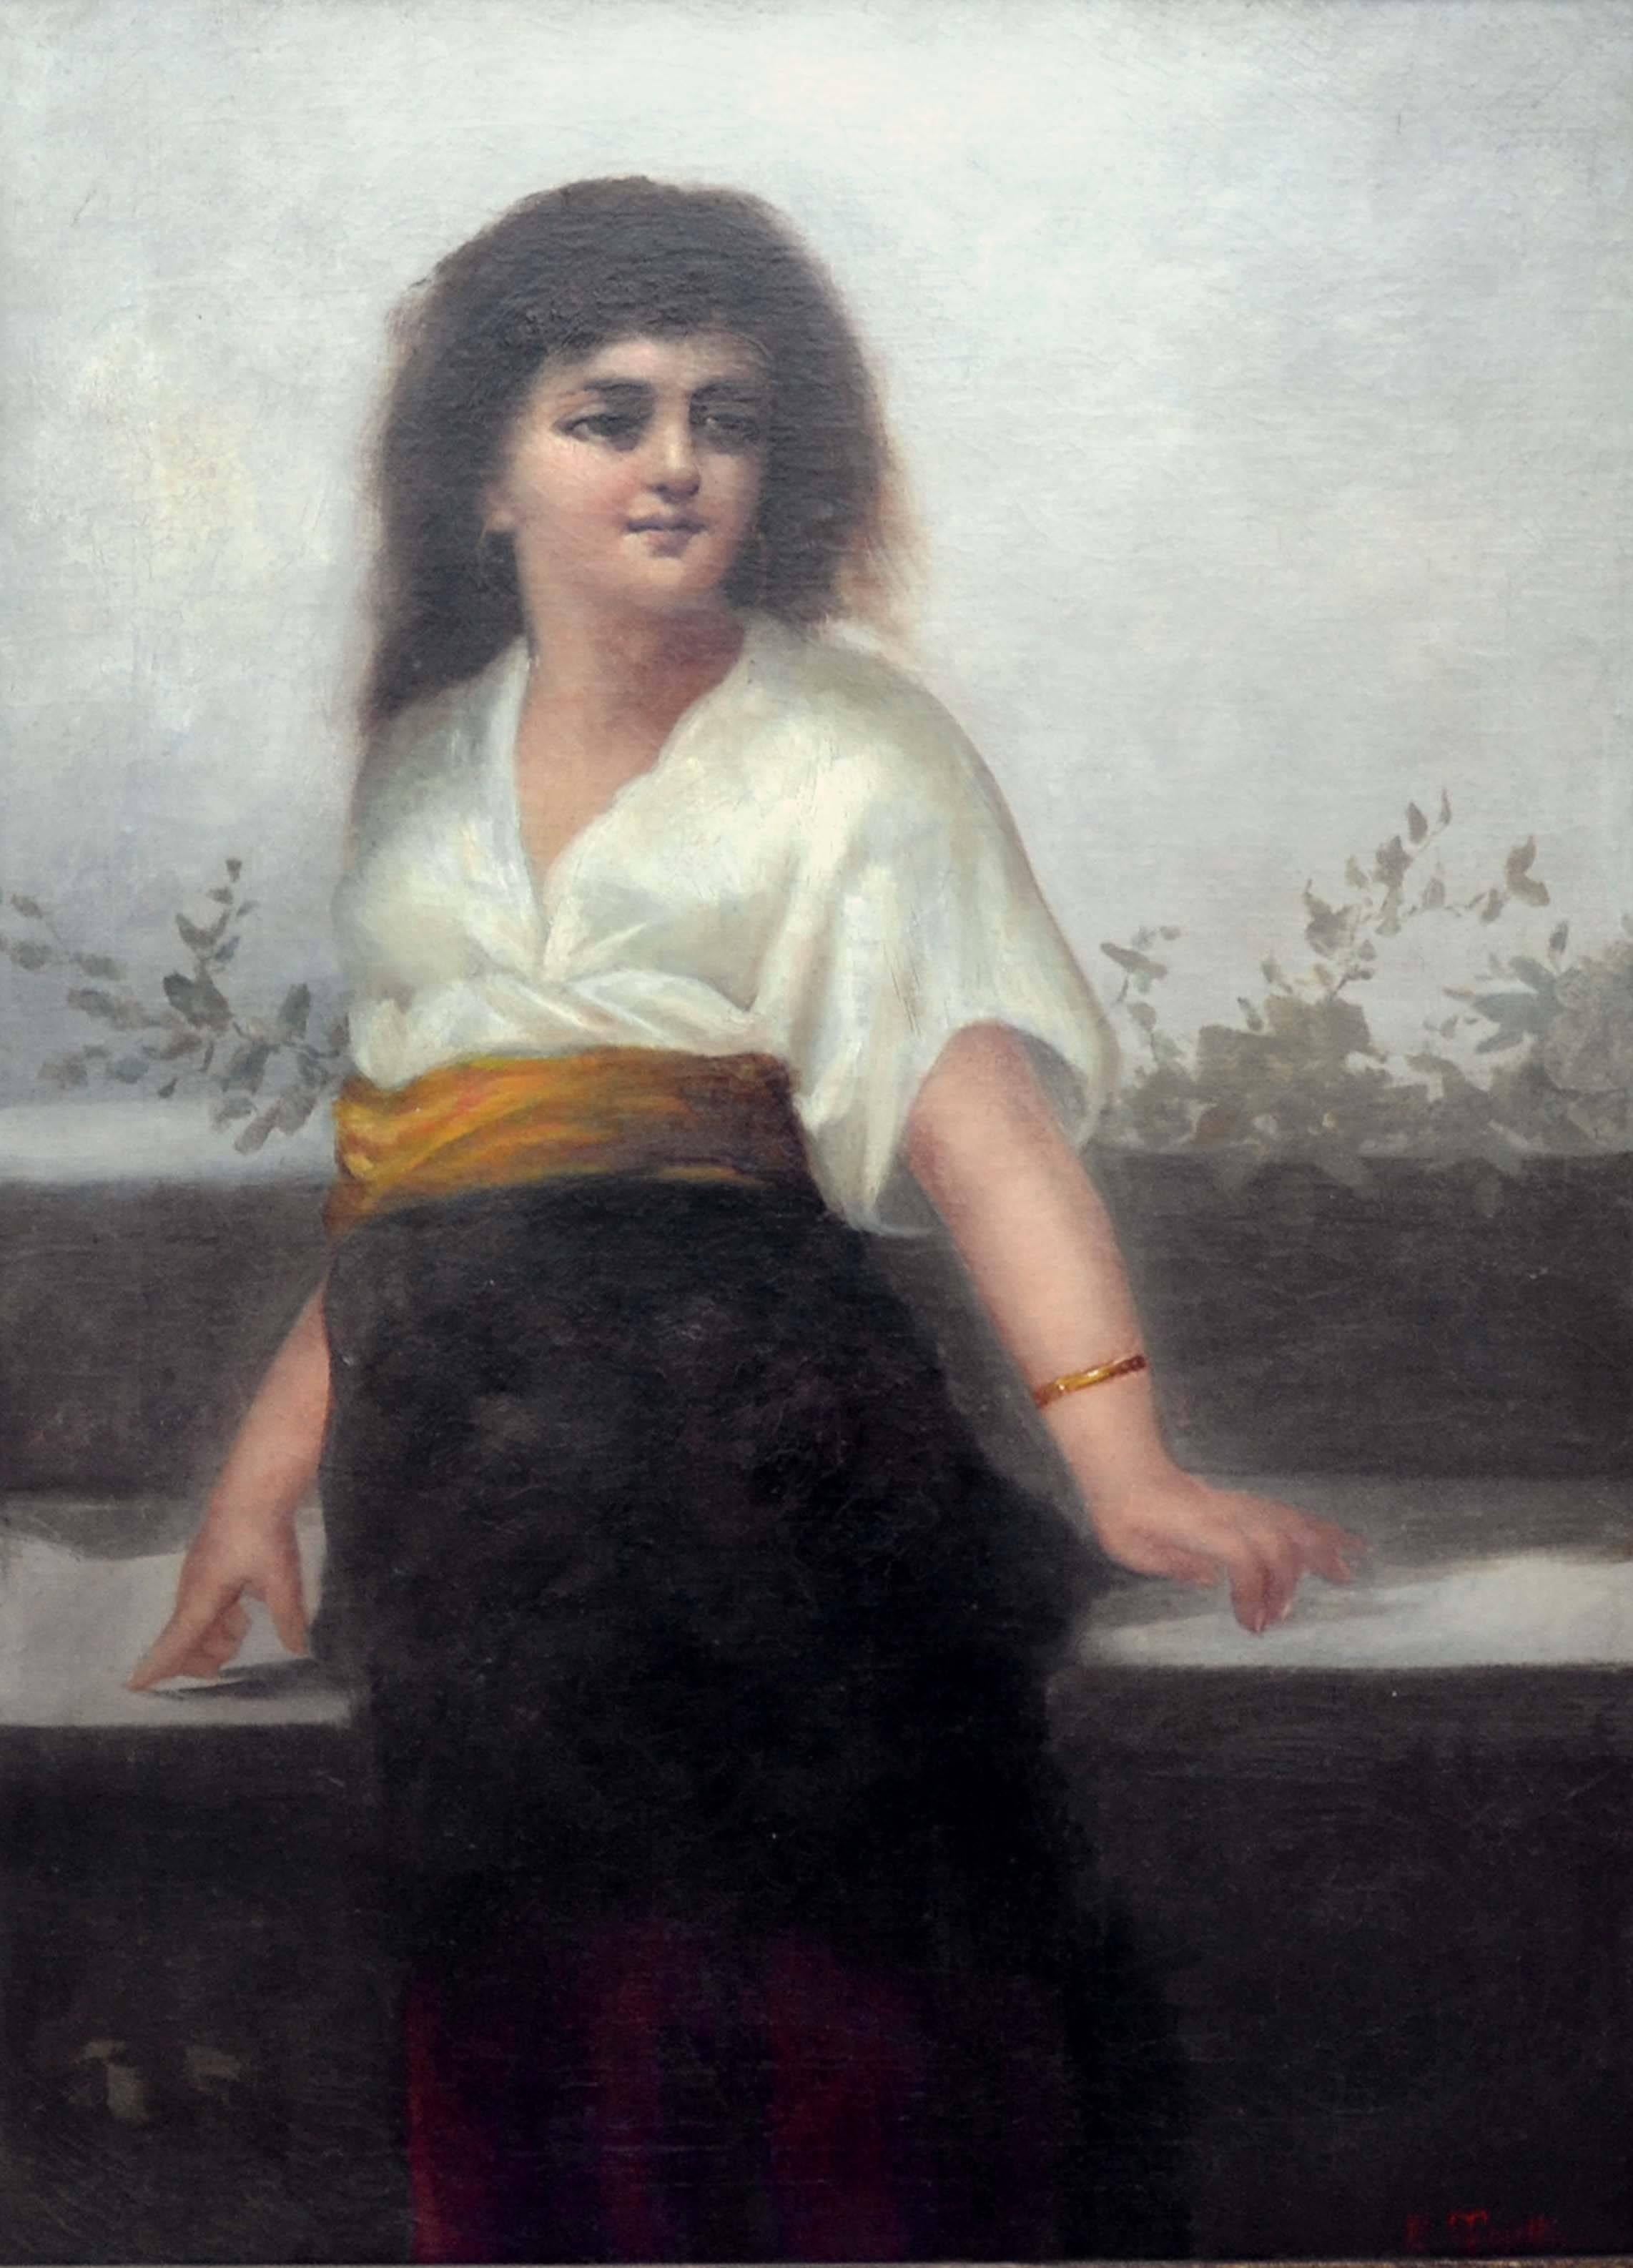 Girl with the Gold Sash, Late 19th Century Large-Scale Female Figurative - Painting by Eduardo Tojetti